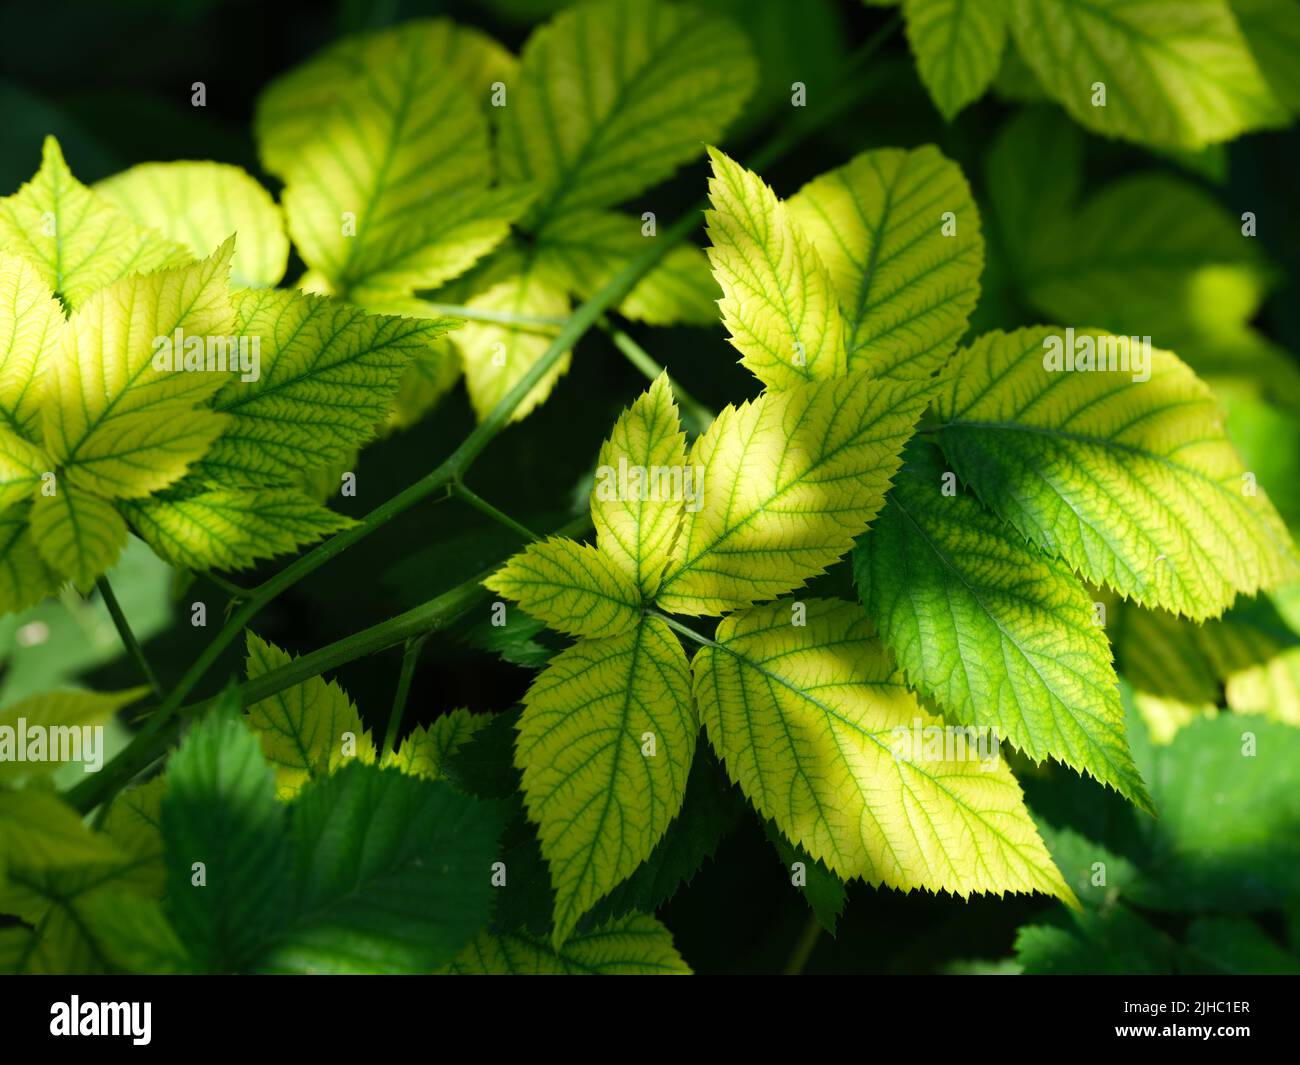 A close-up shot of a blackberry plant. Yellow leaves have an iron deficiency. Stock Photo